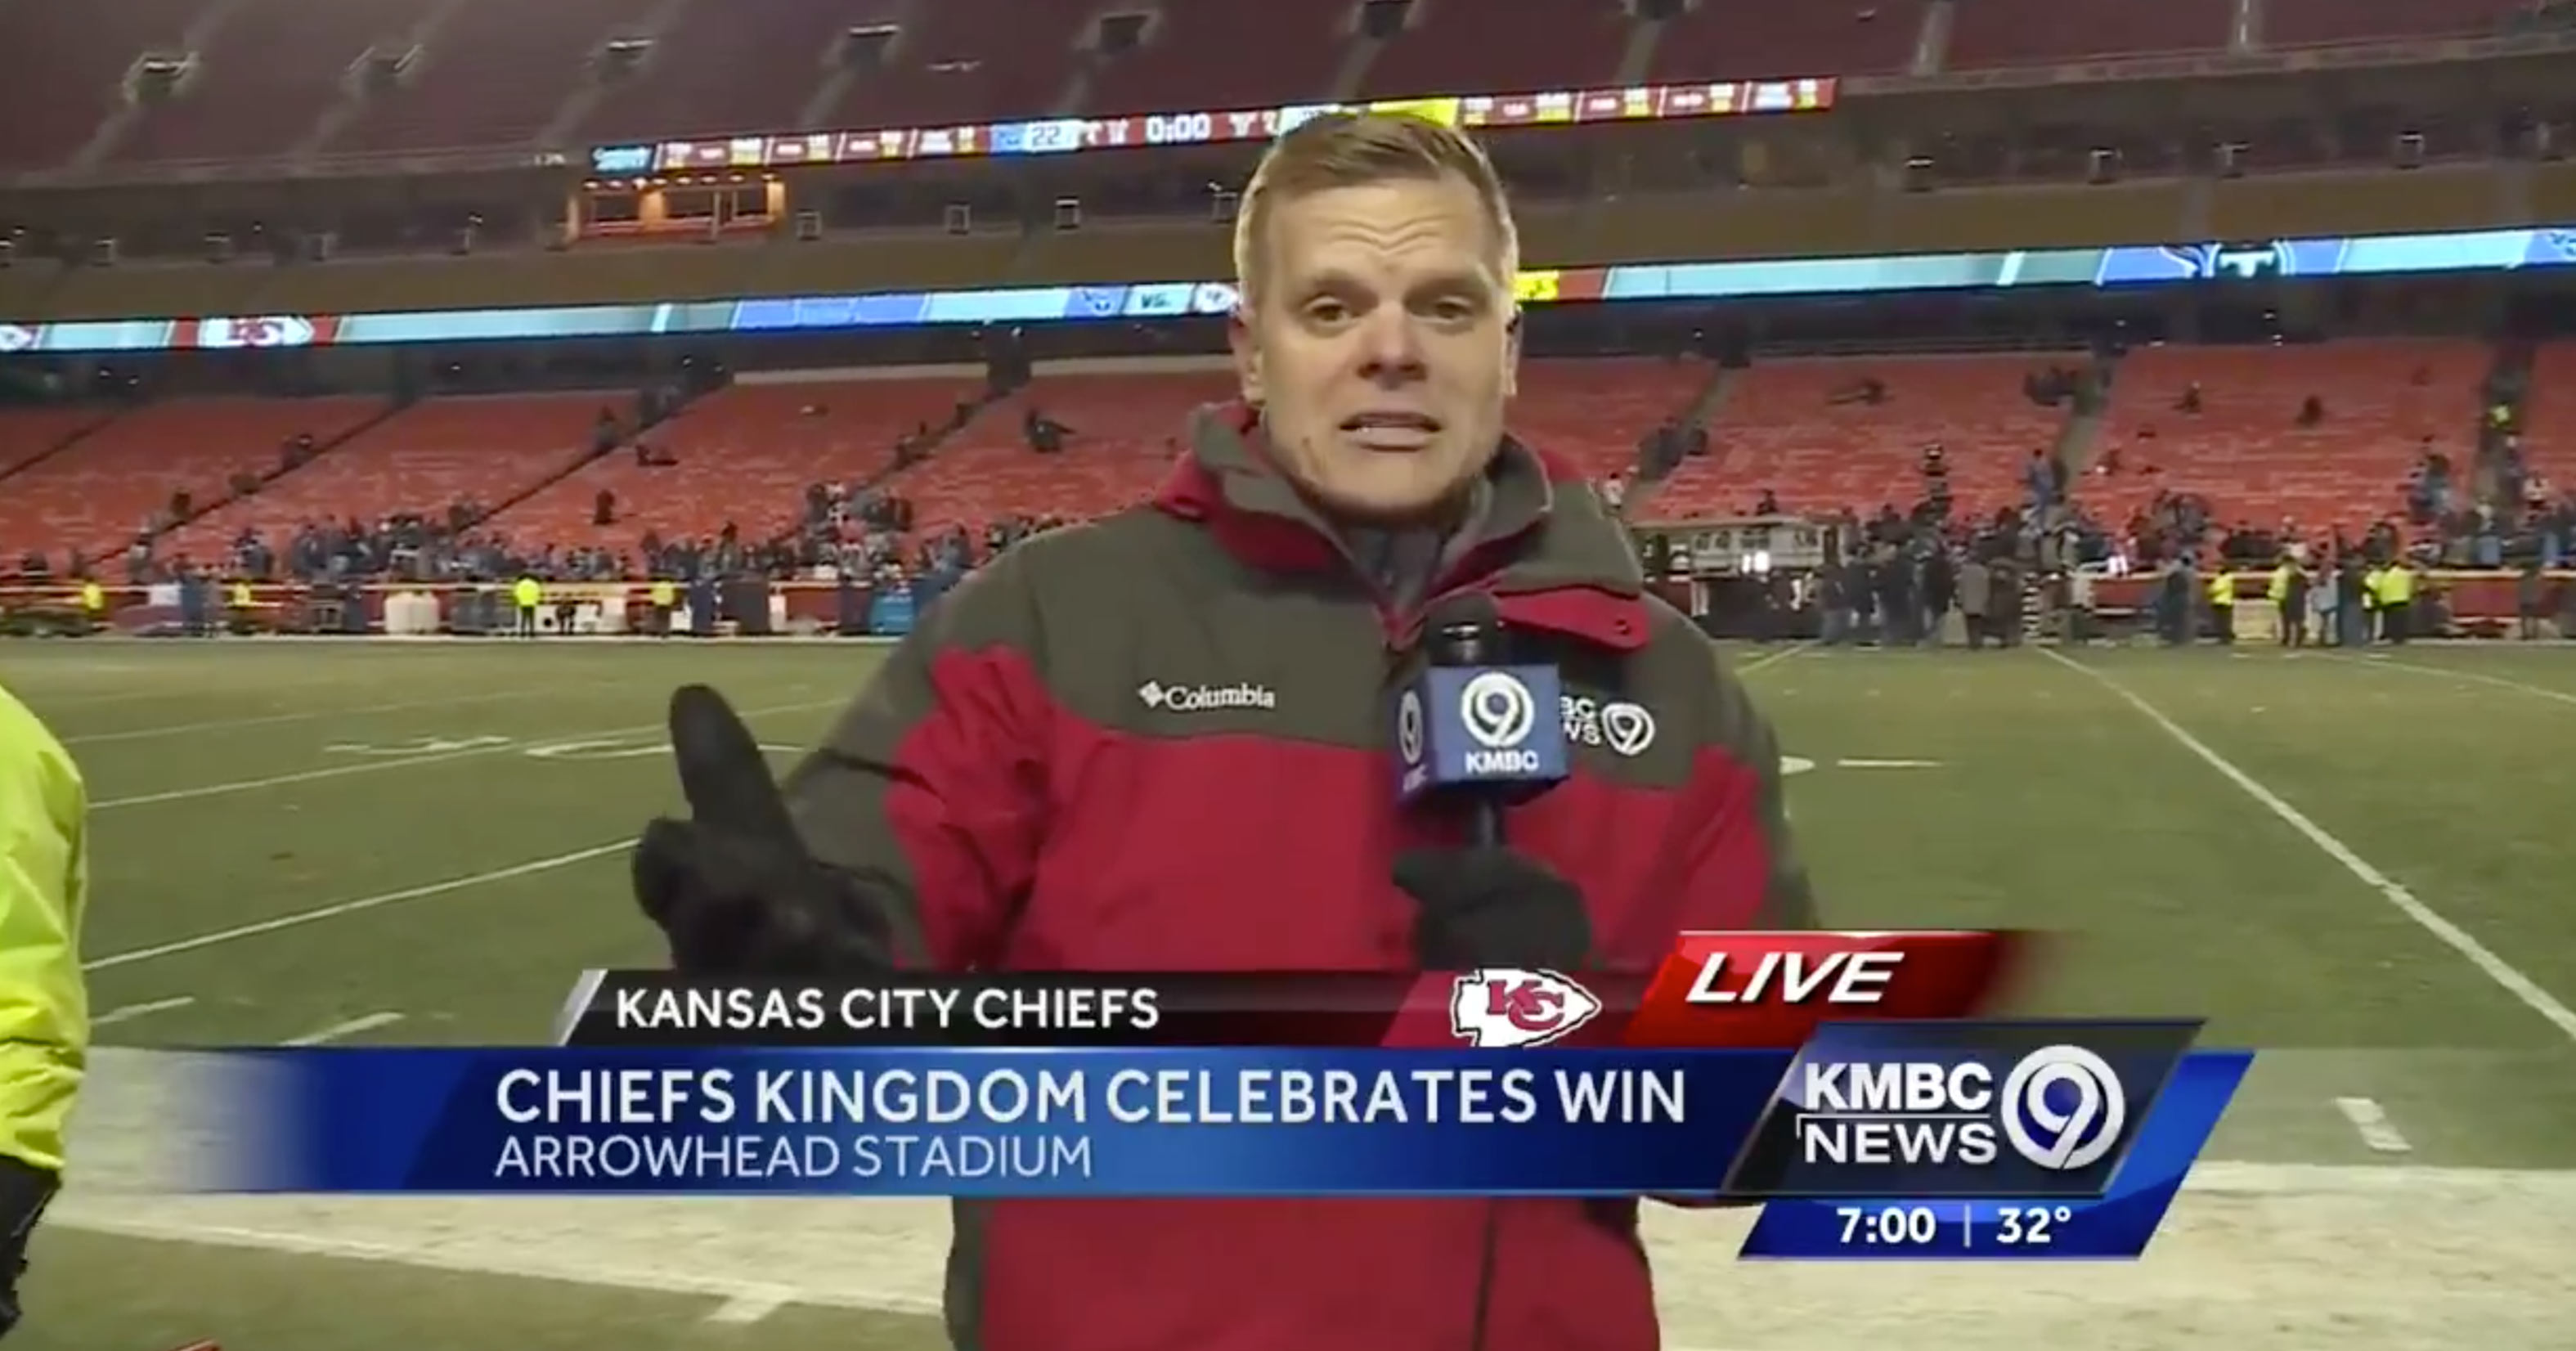 Kansas City News Station Has No Clue The Chiefs Lost (VIDEO)